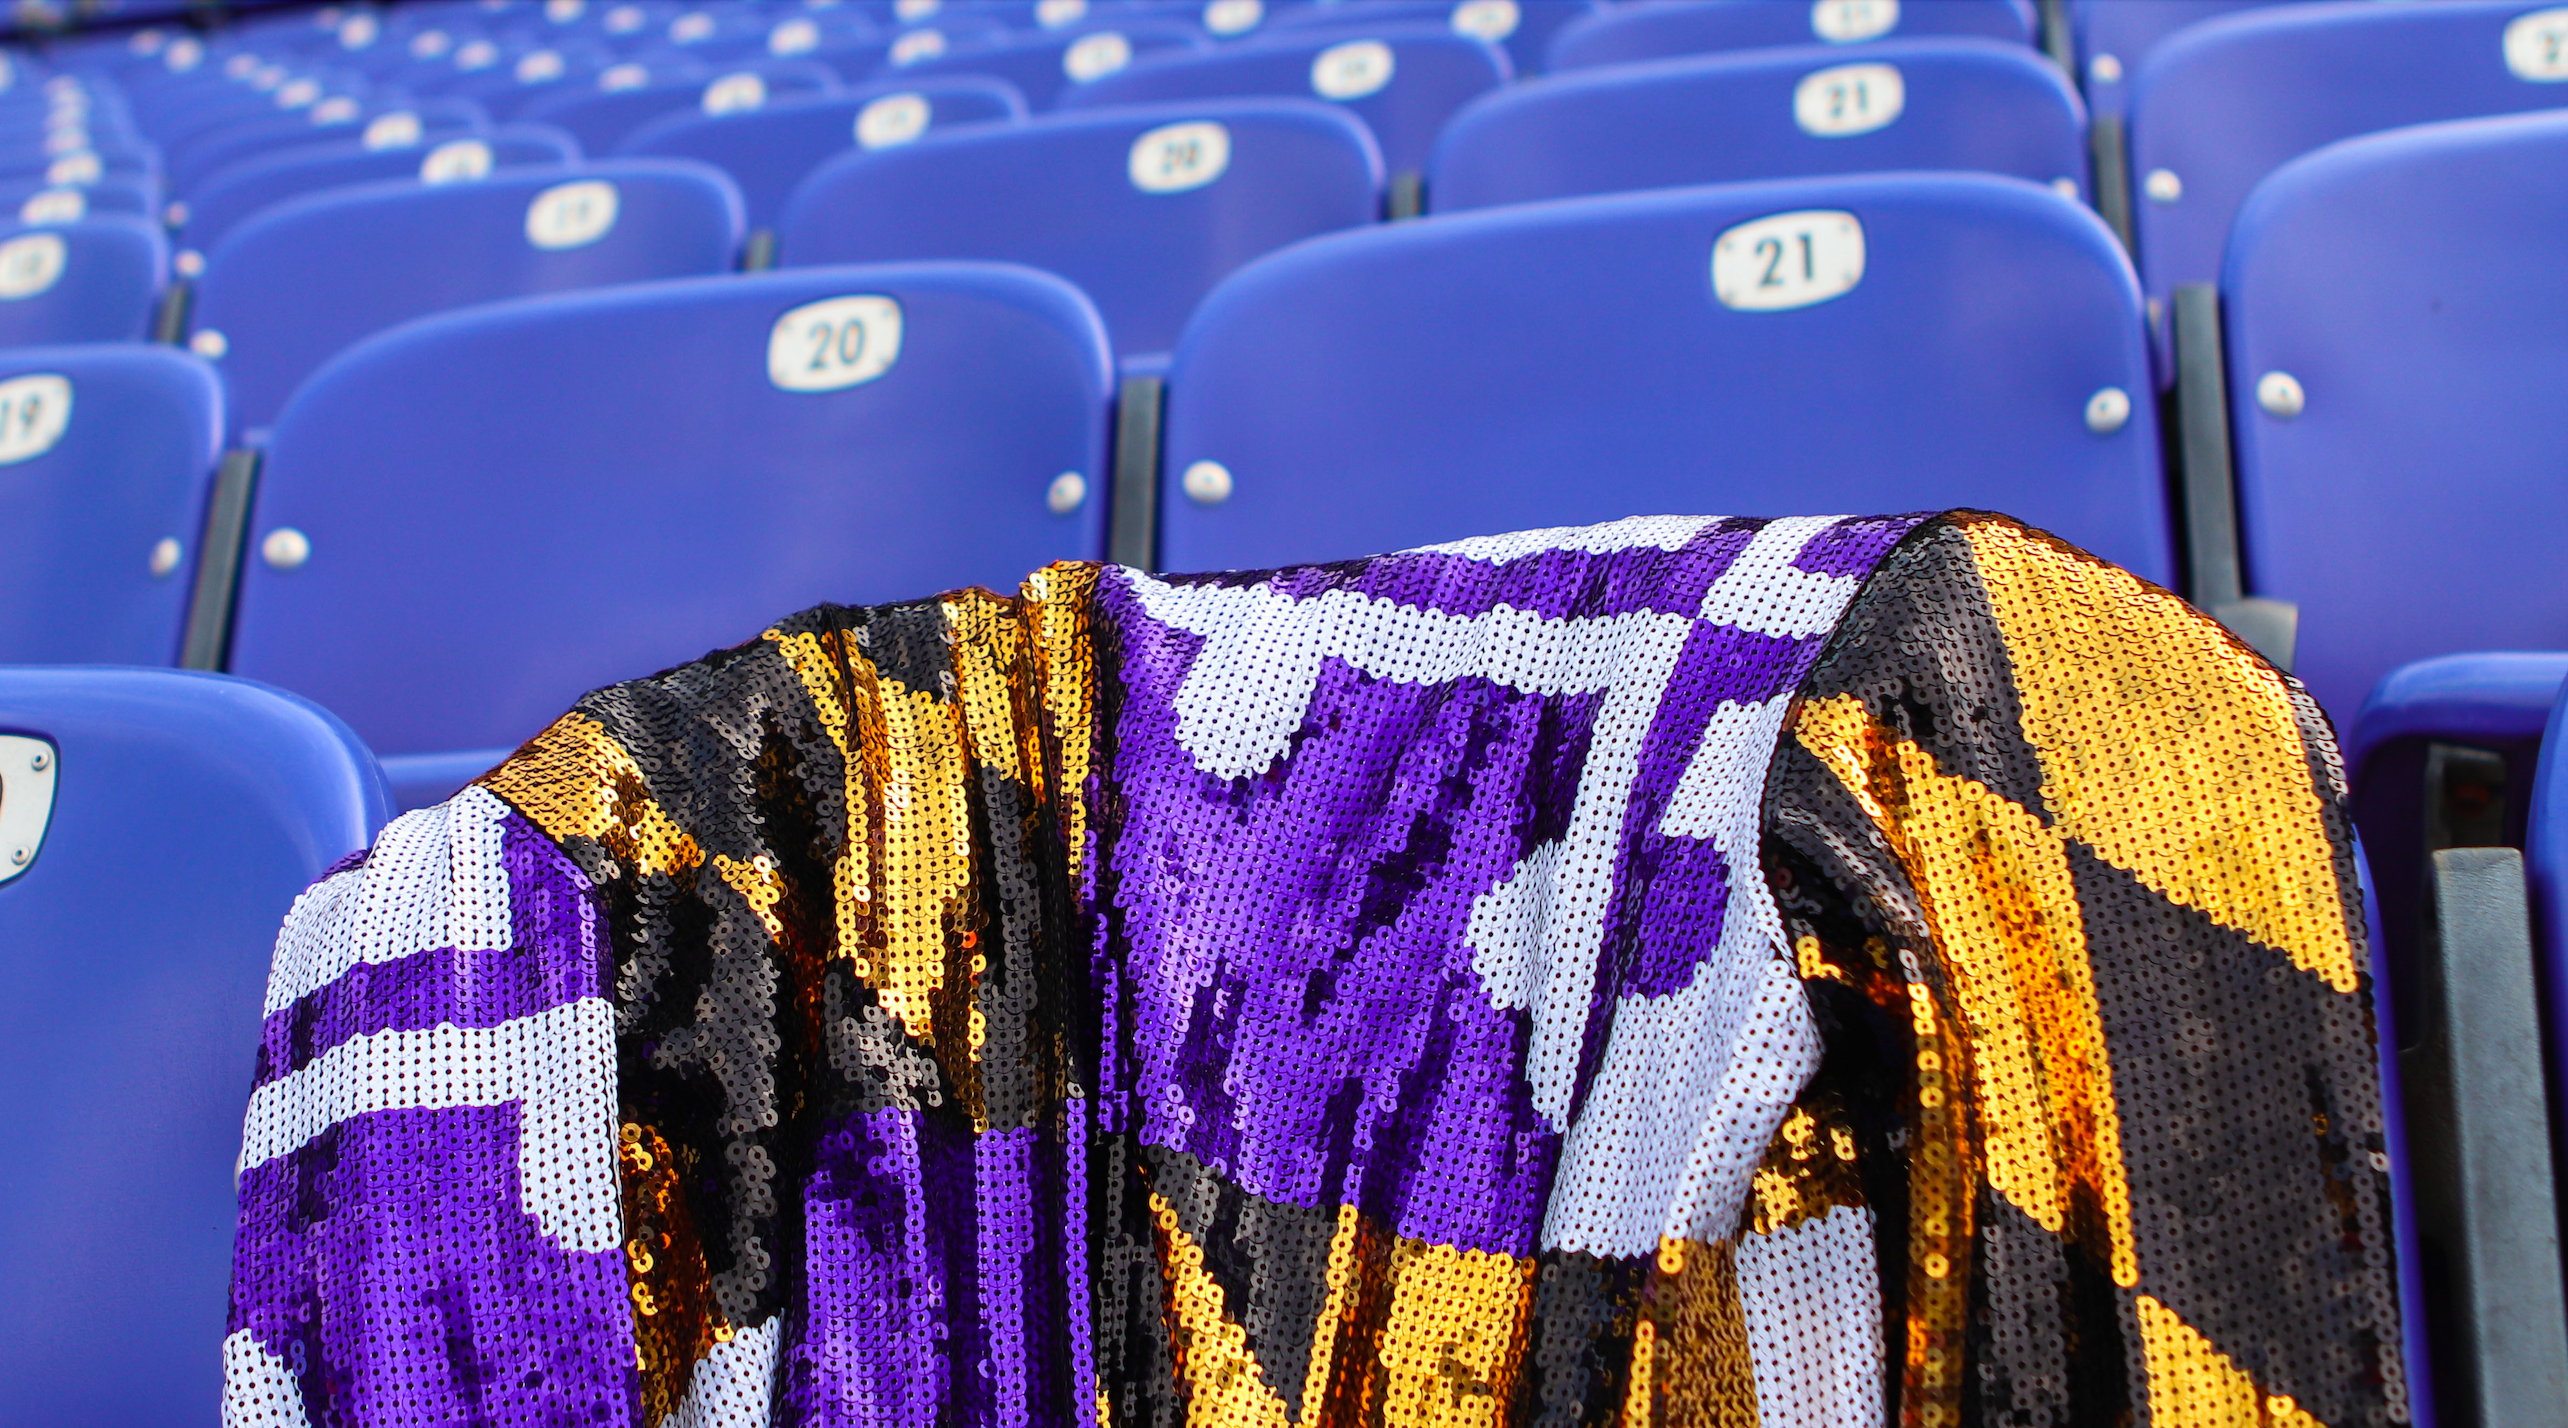 Purple & Gold Maryland Flag / Sequin Jacket (Estimated Ship Date: 9/17) - Route One Apparel